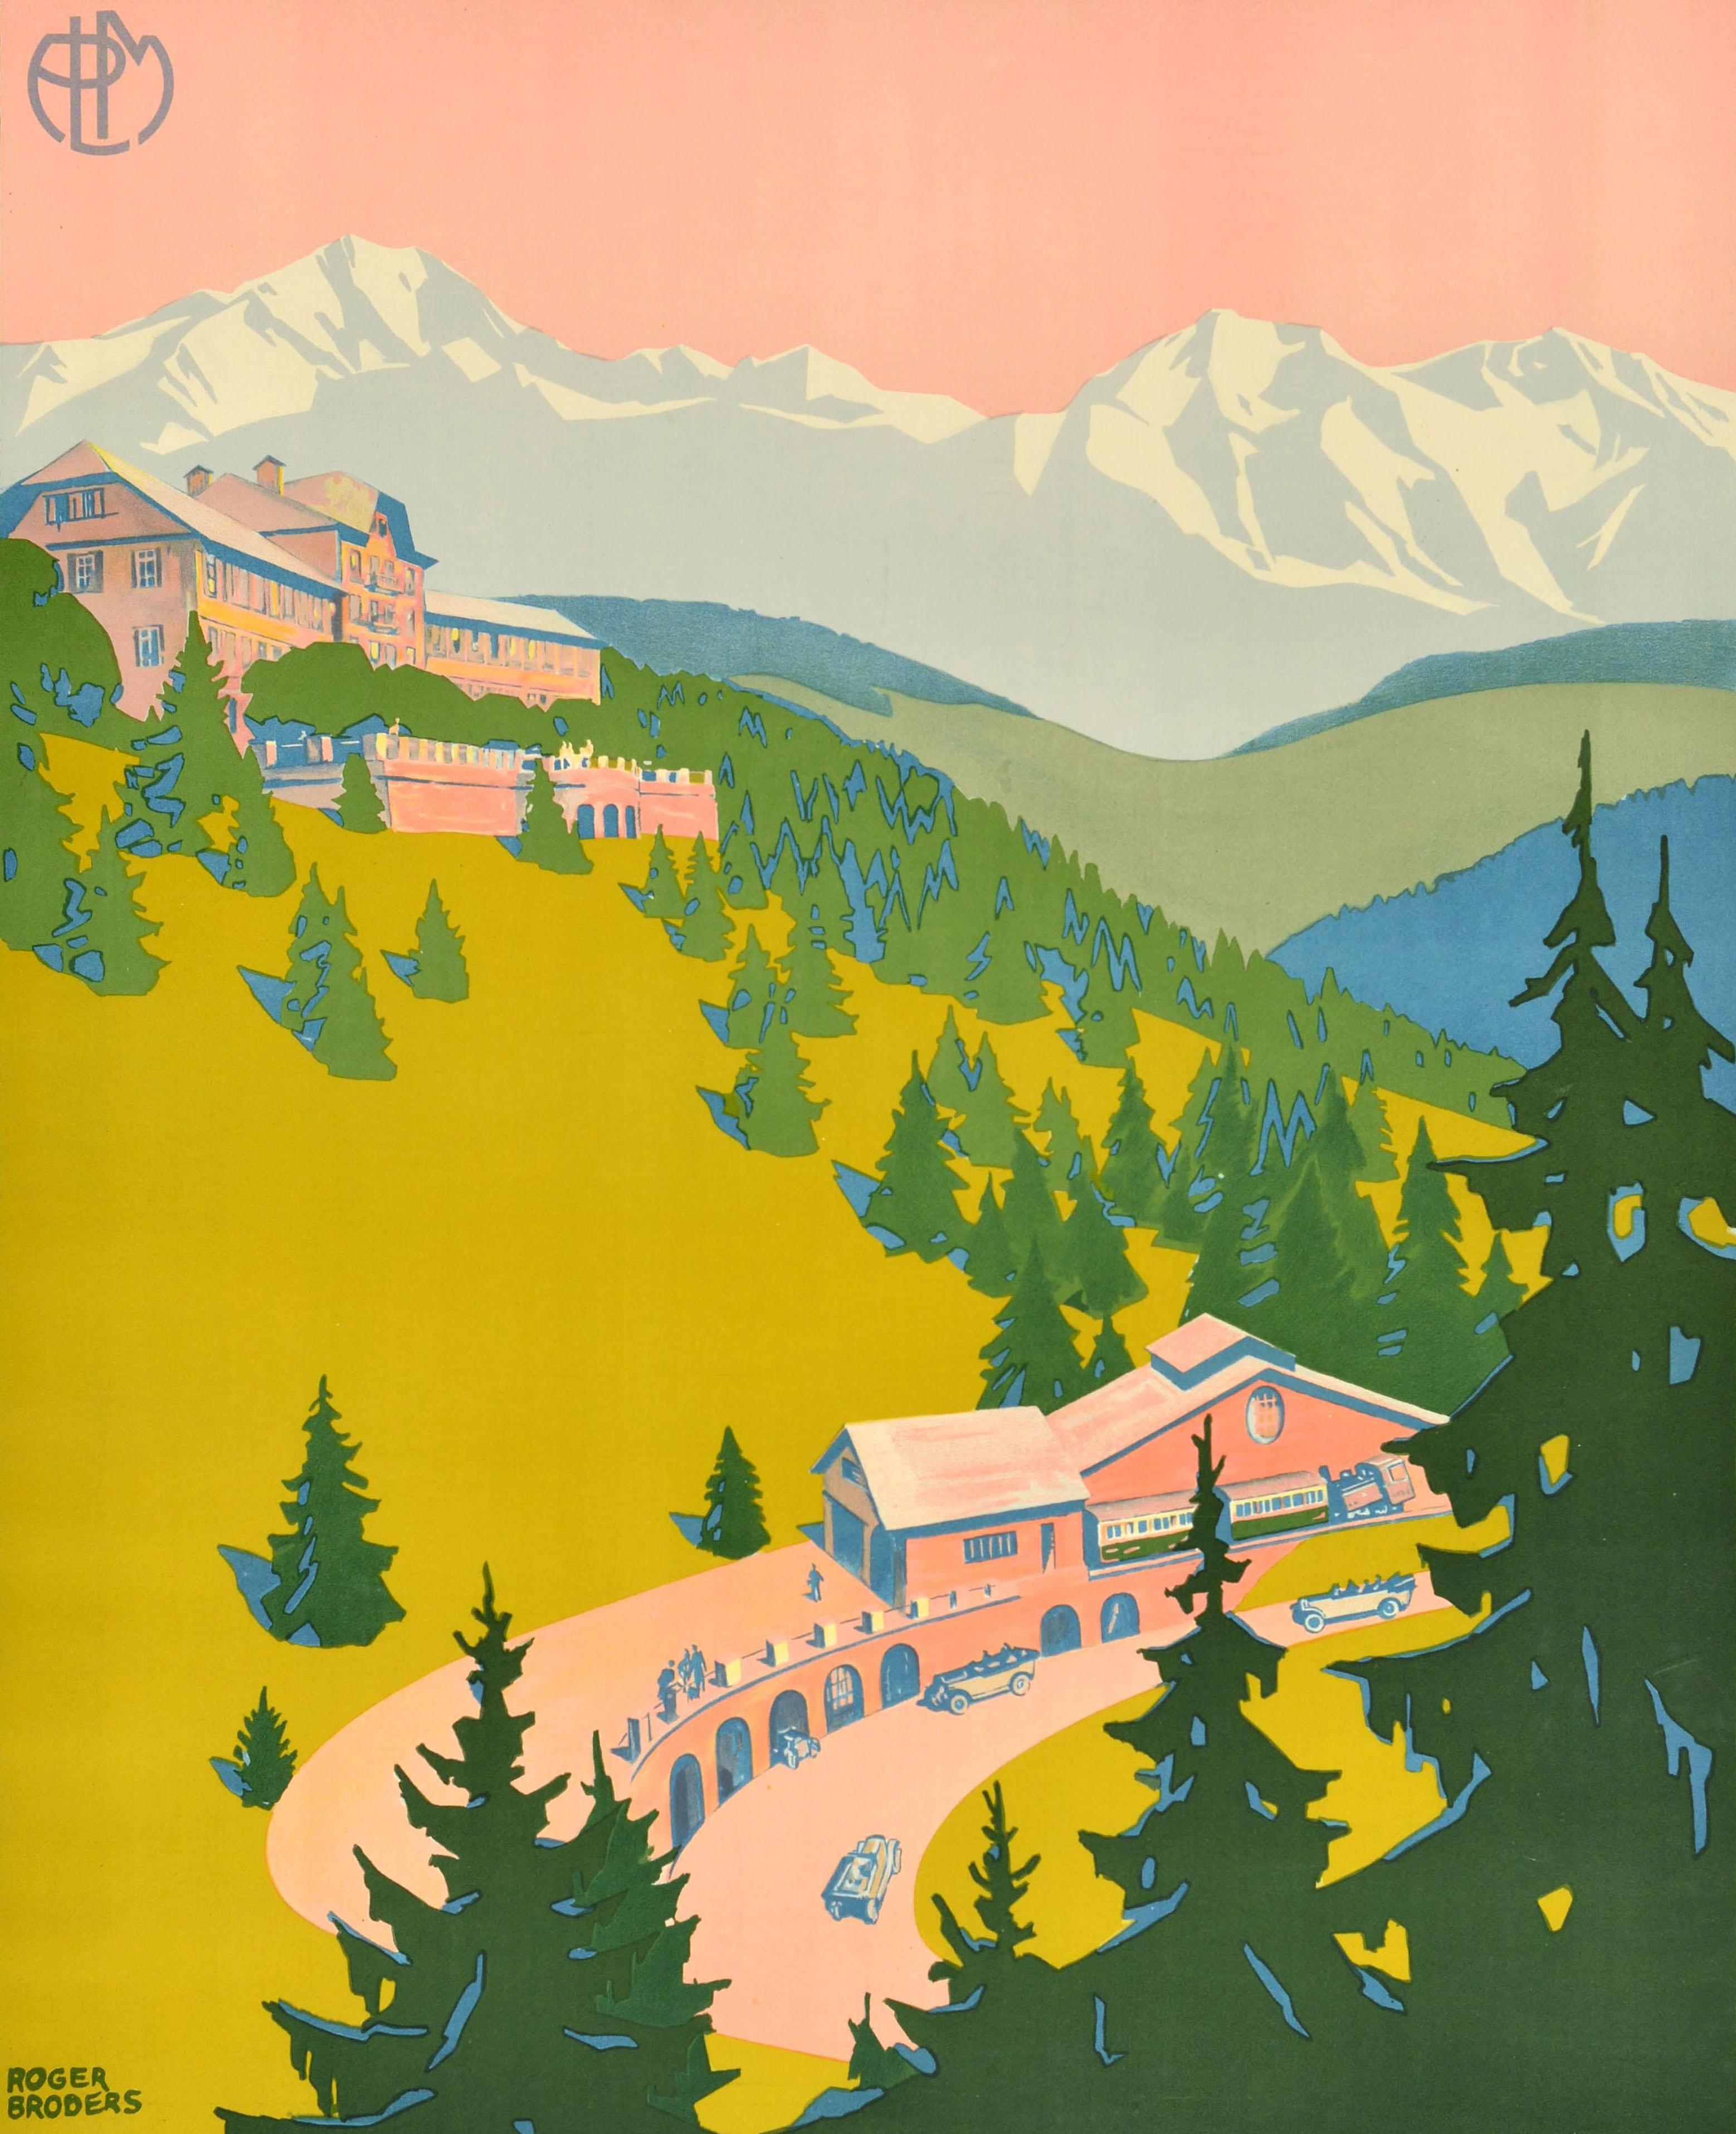 Original vintage travel poster for Le Mont Revard Grand Hotel PLM 1550m d'Altitude issued by the PLM Paris Lyon Mediterranee railway featuring a stunning design by the notable French artist Roger Broders (1883-1953) depicting classic cars in front